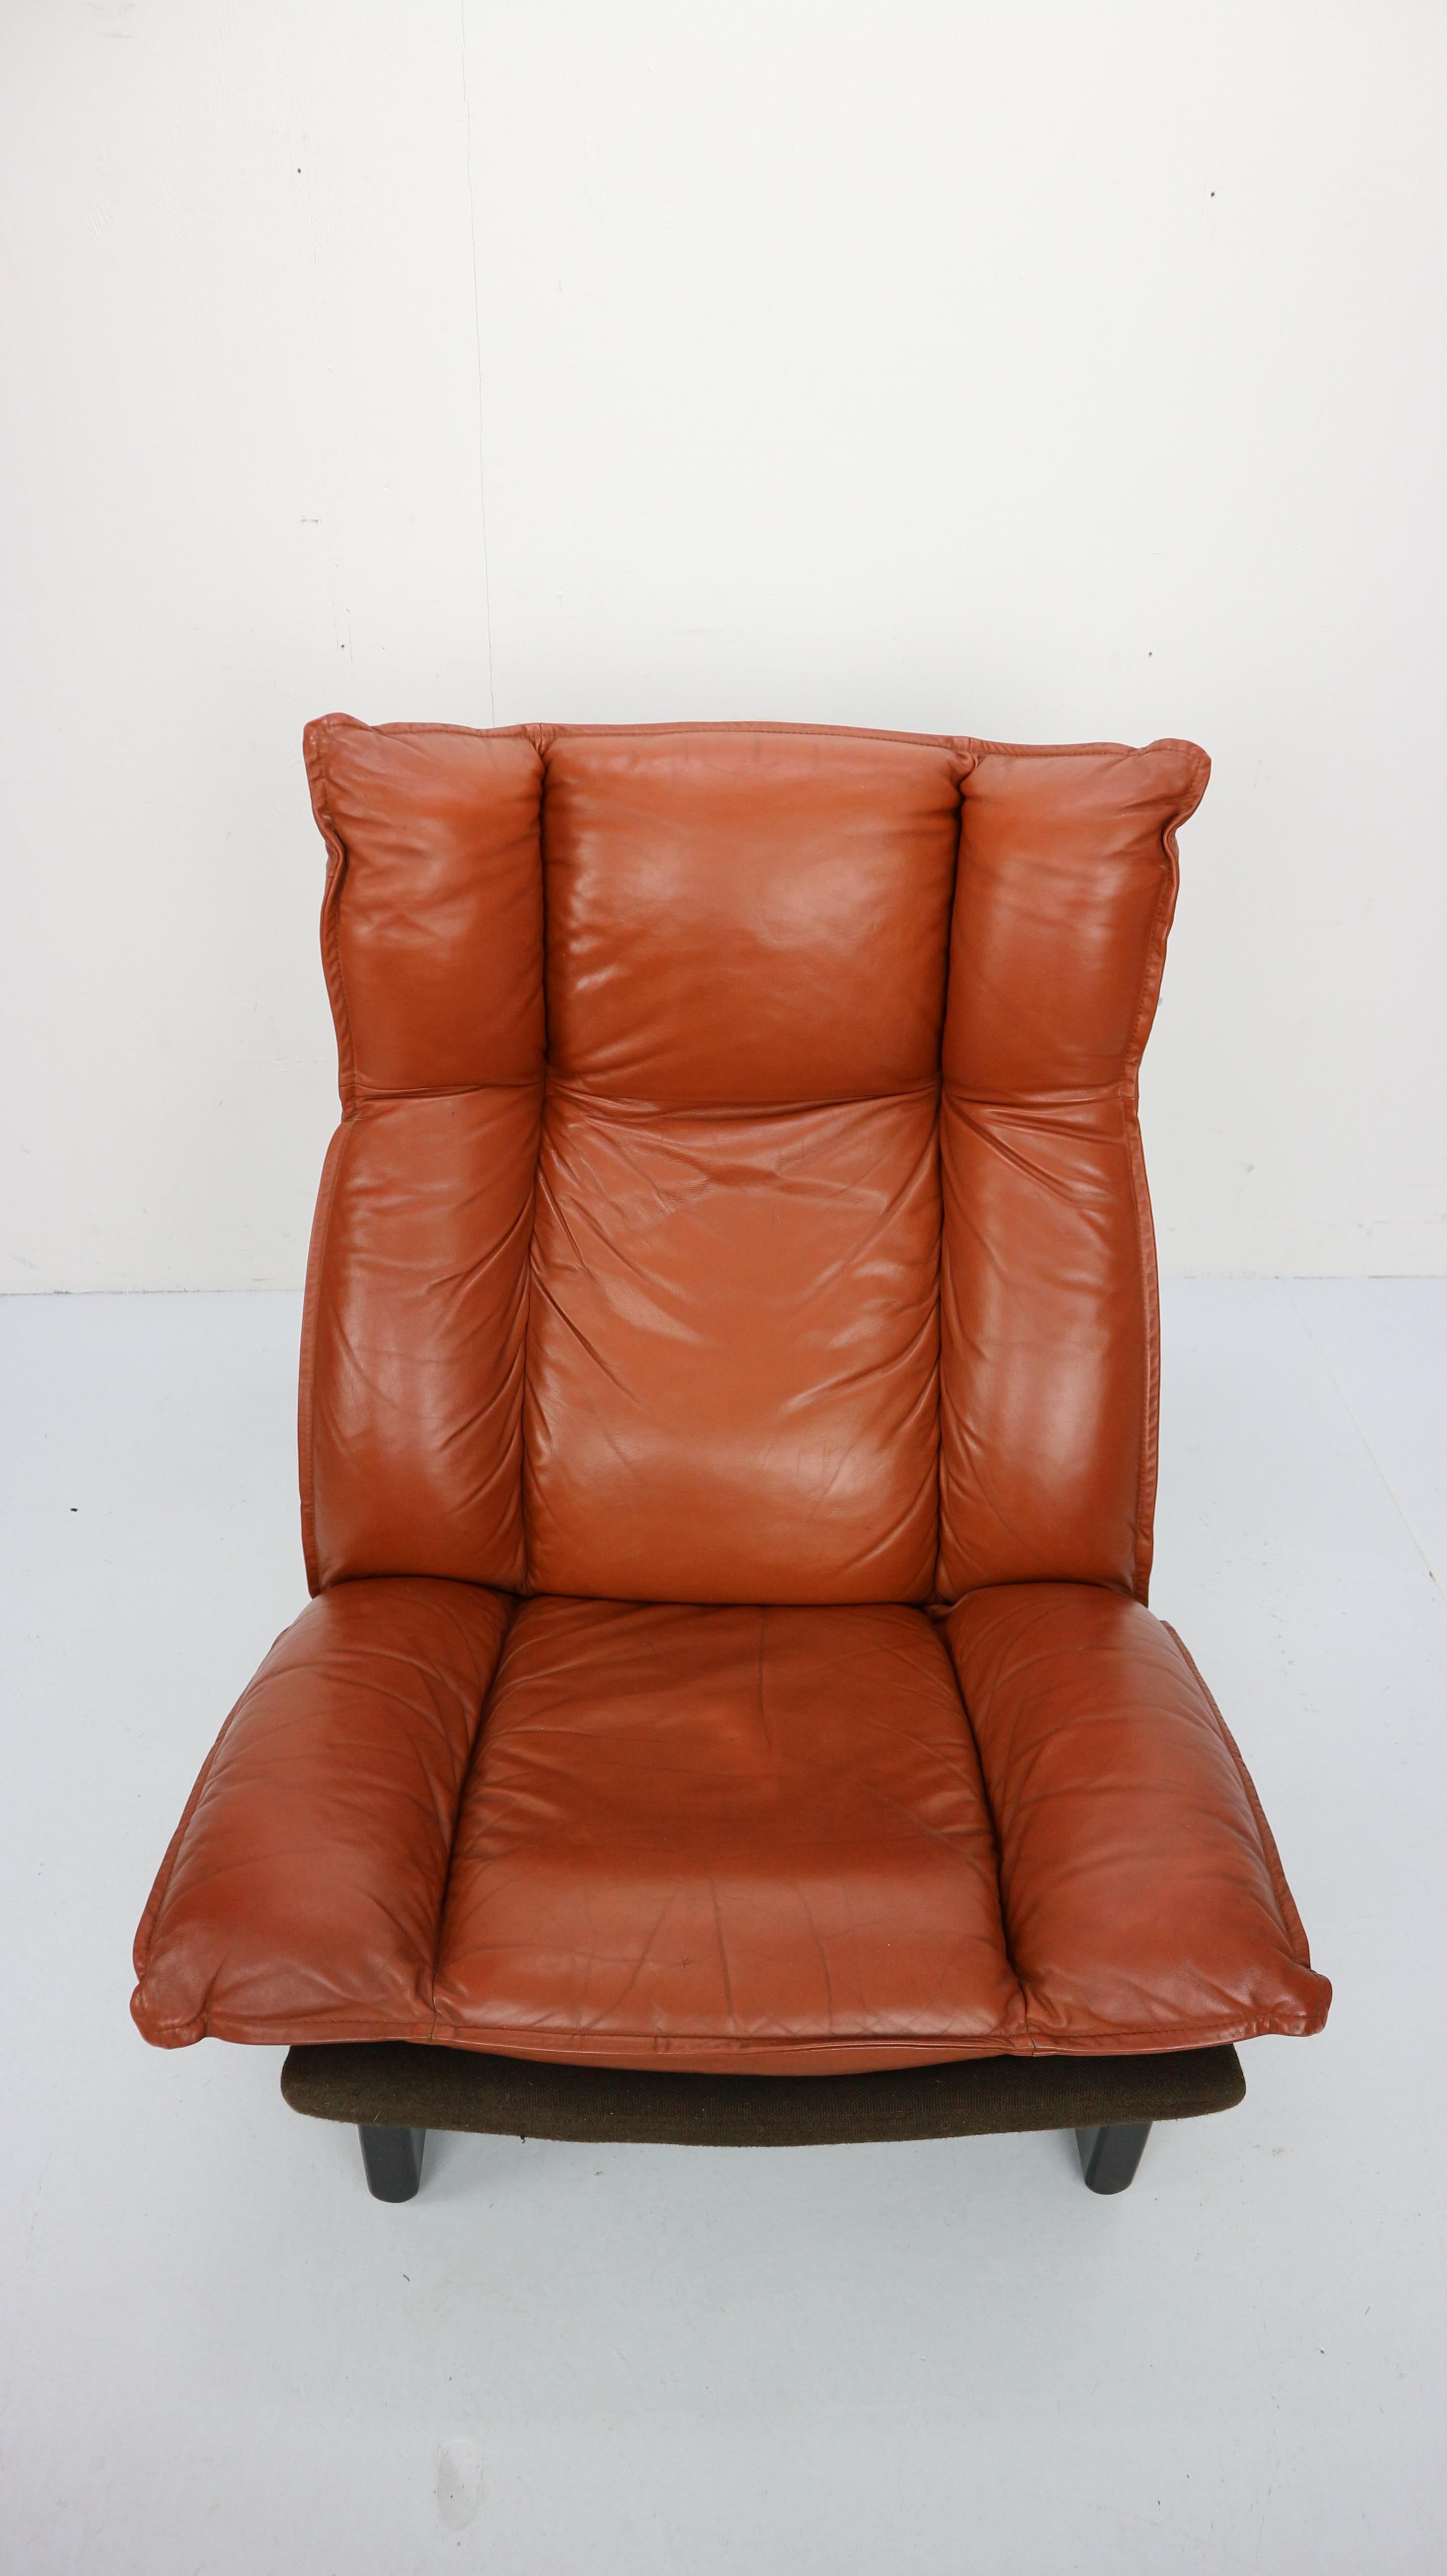 Cognac Leather and Wood Lounge Chair, Dutch Modern Design, 1970s 2